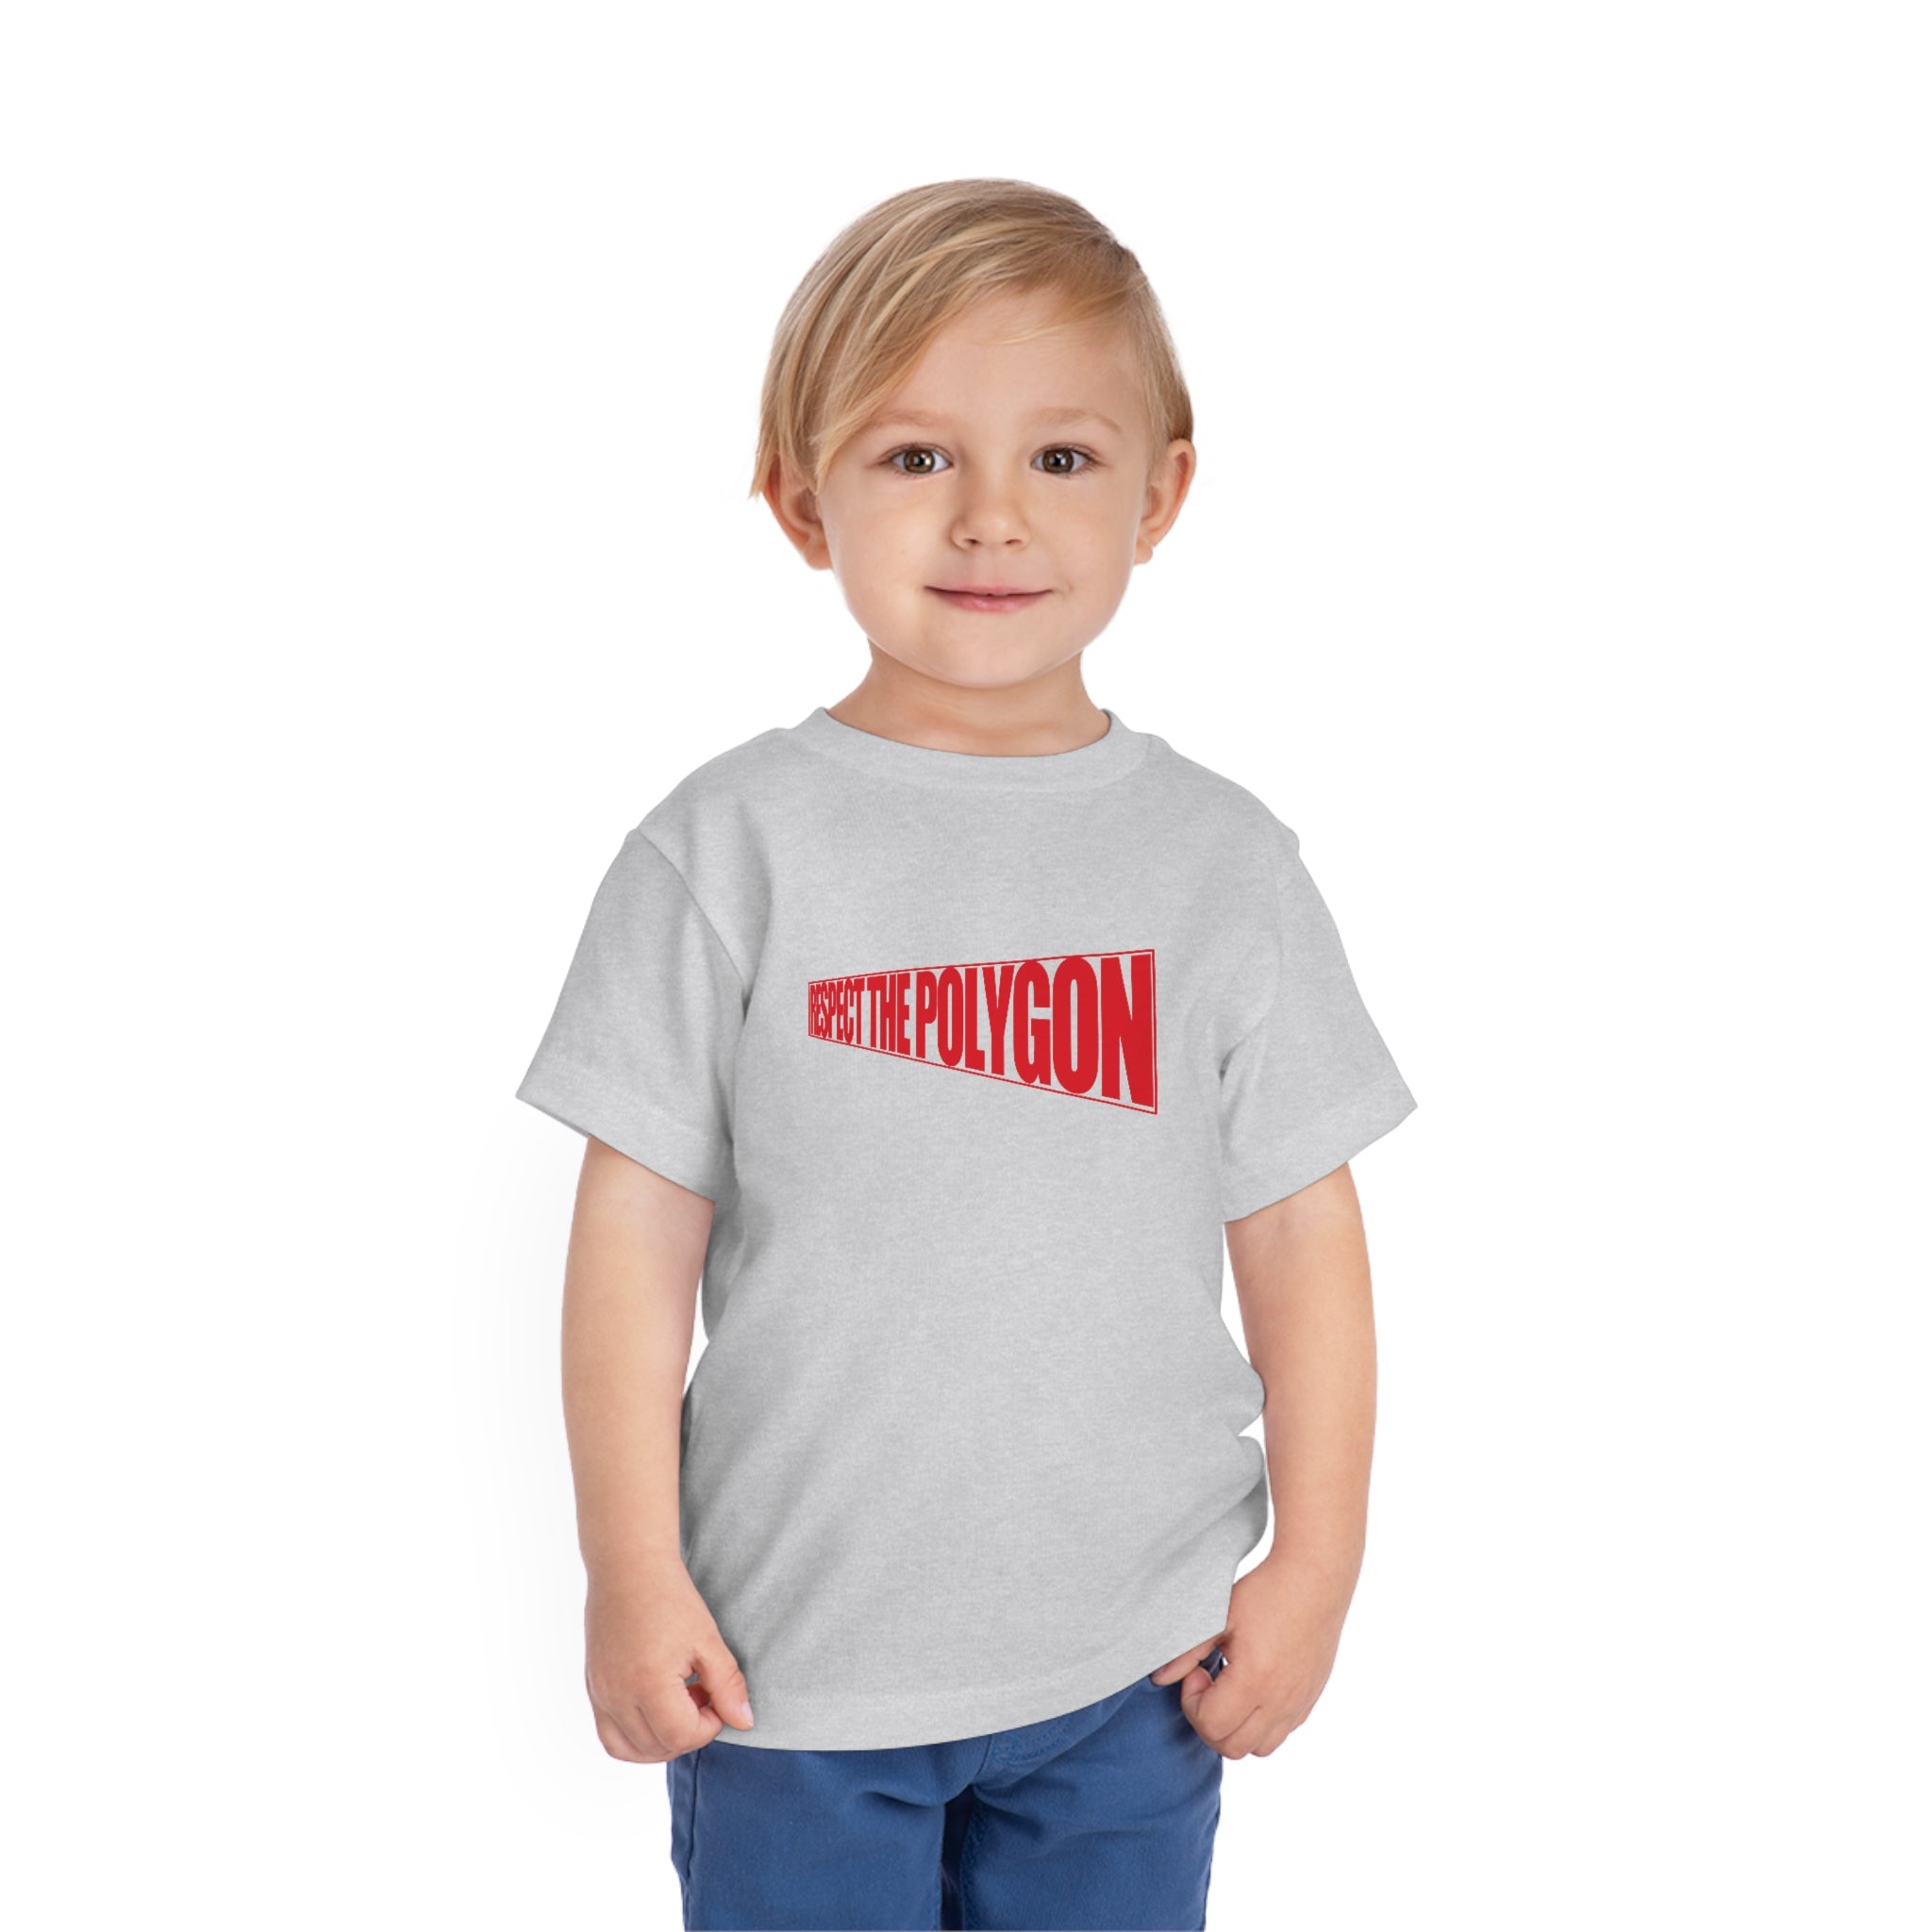 Respect The Polygon Toddler Tee 